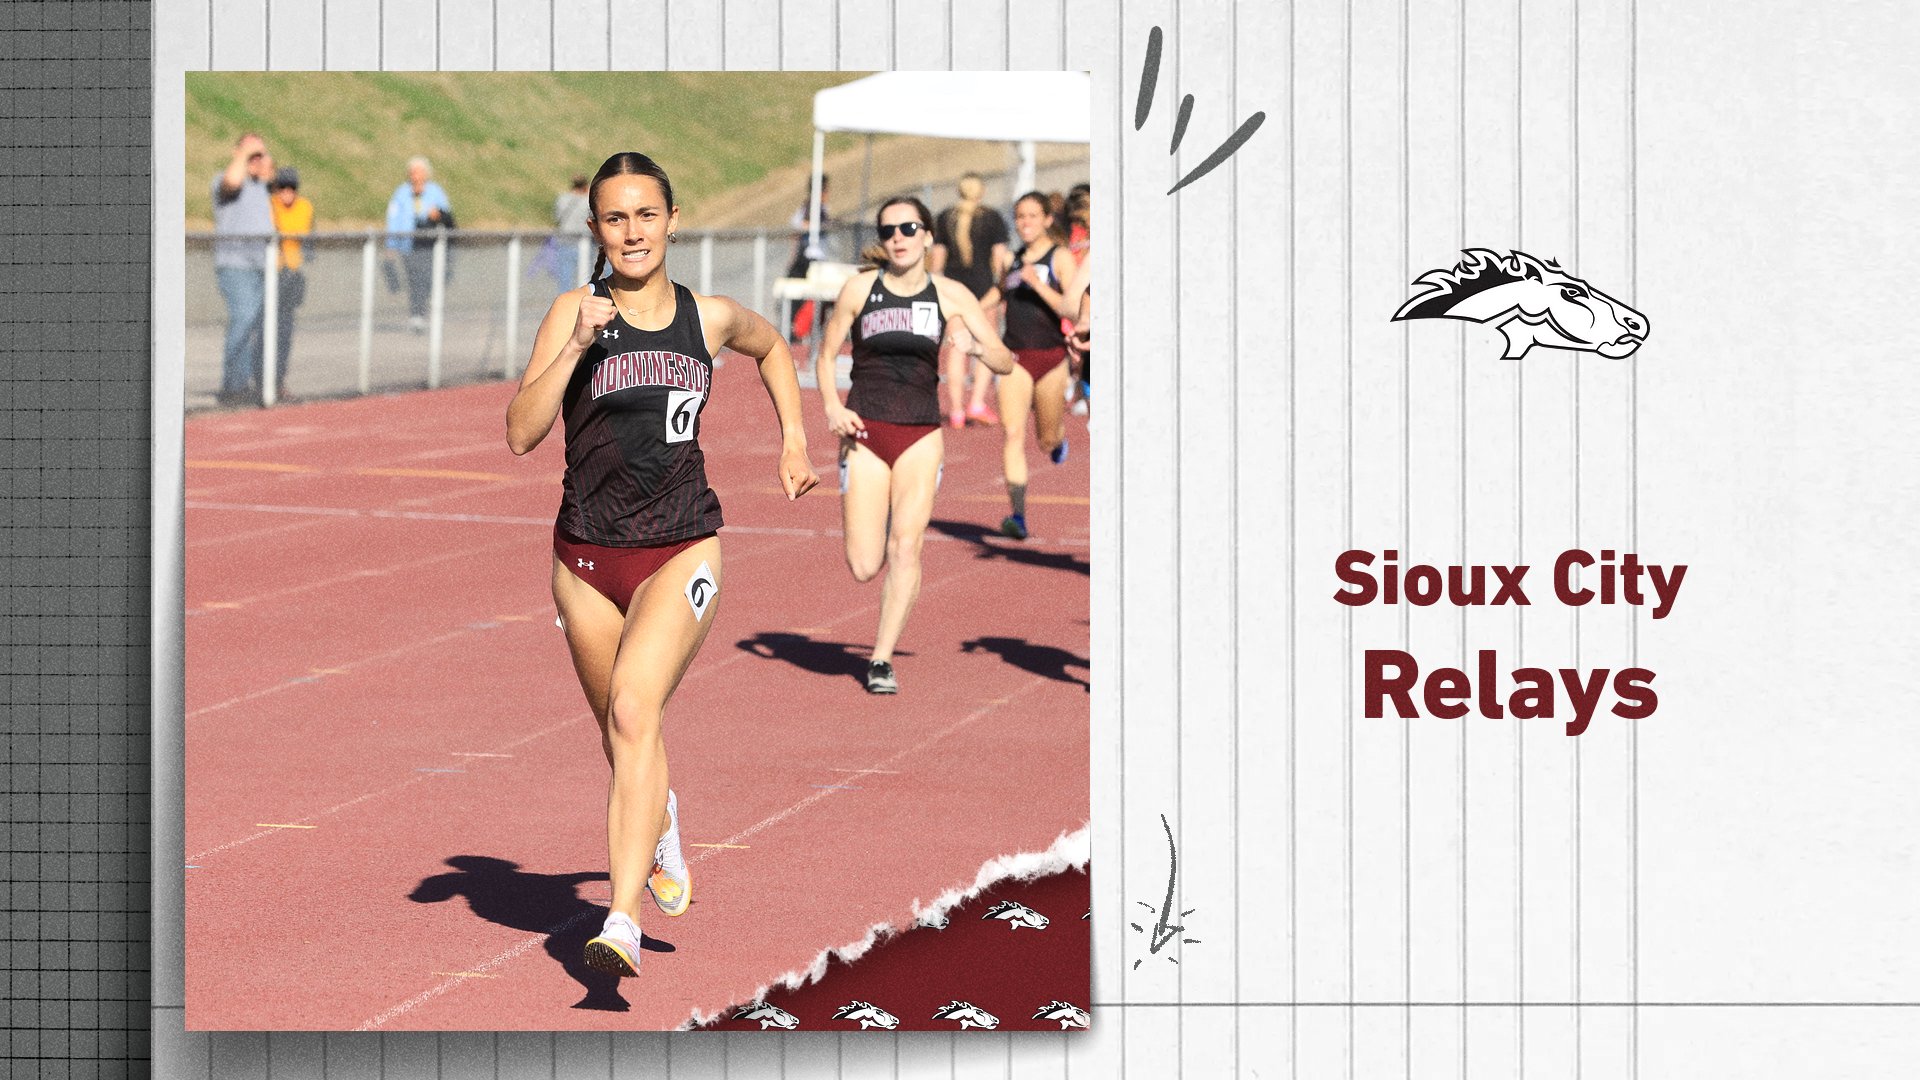 Morningside wins two events at Sioux City Relays